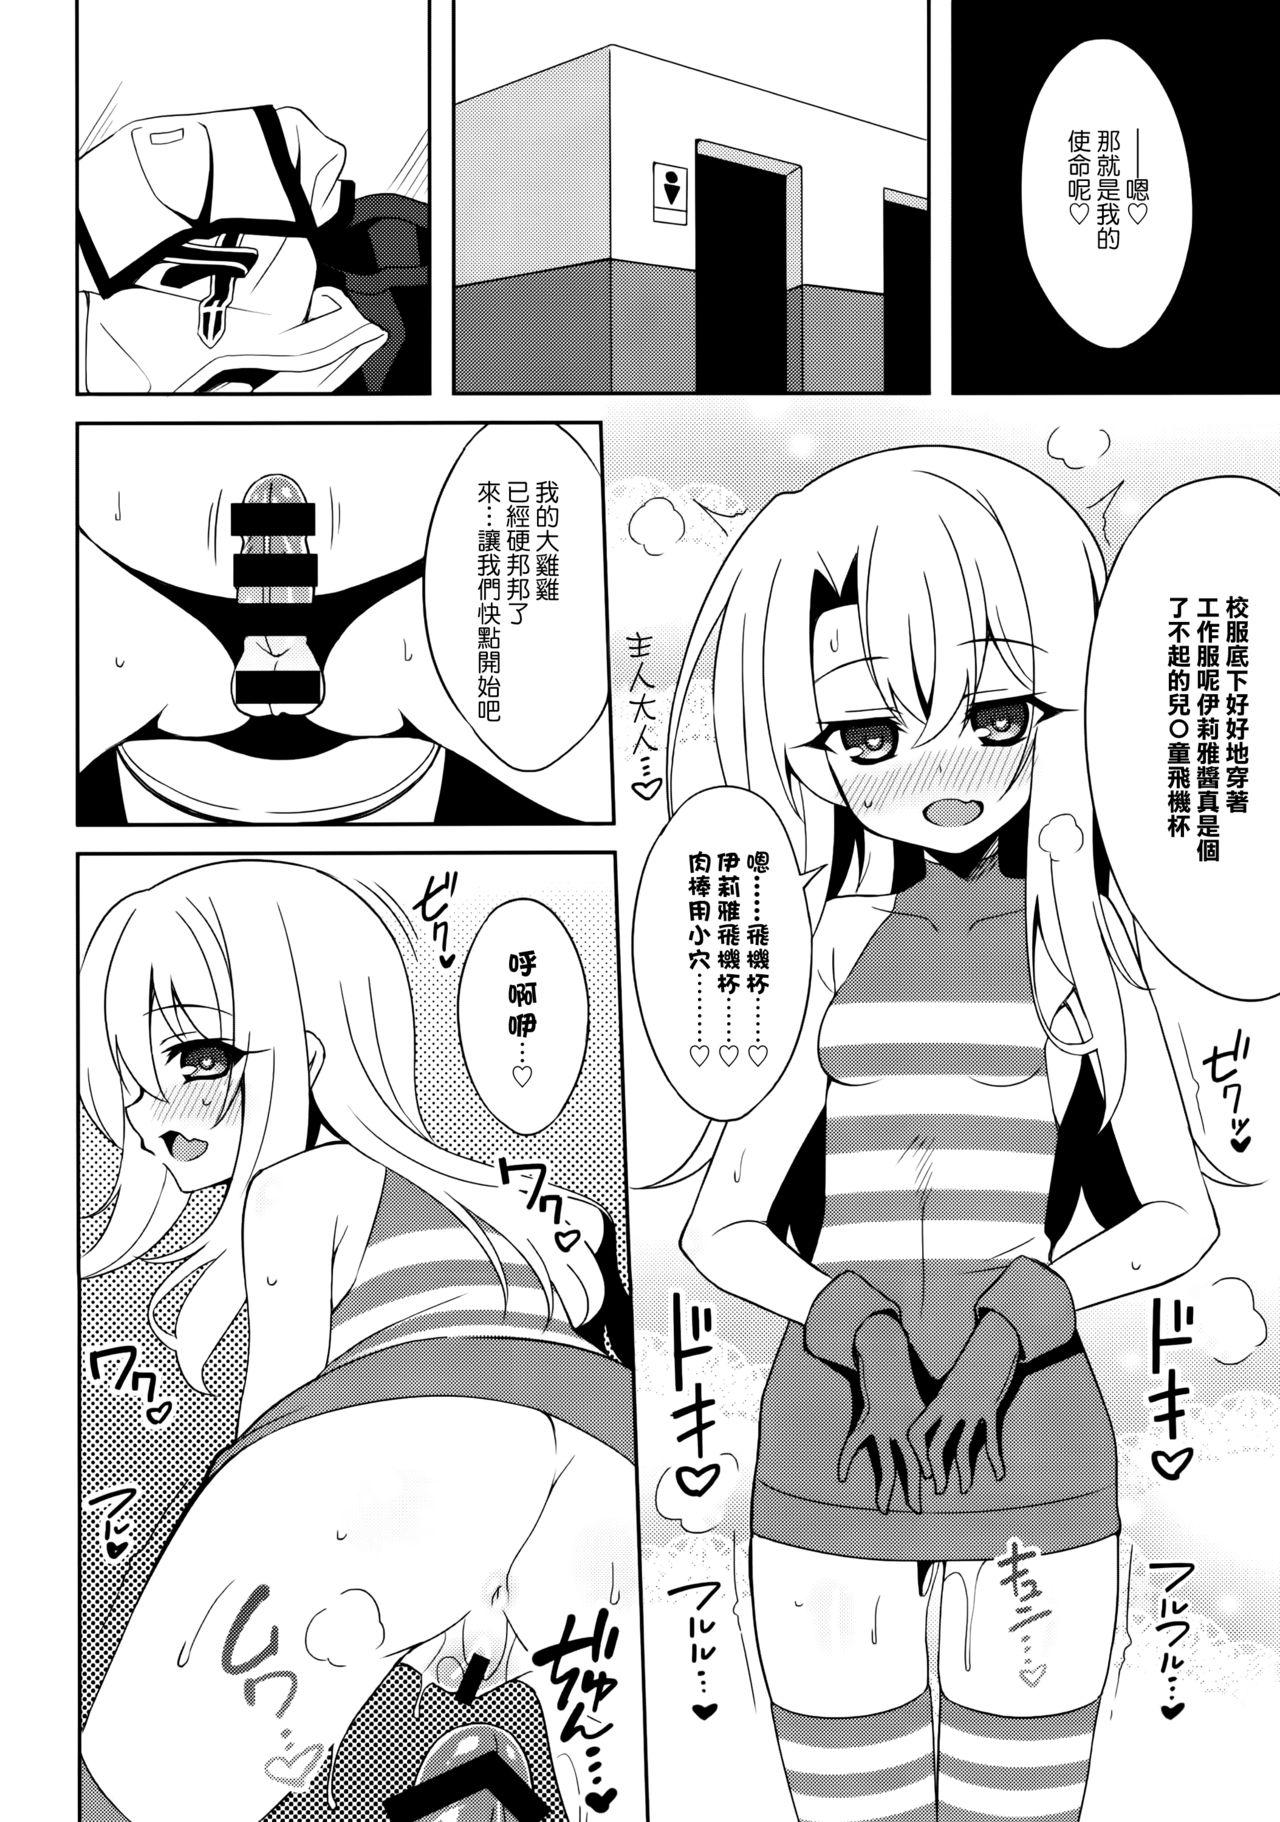 Blowjob Contest Marunaho-chan Install - Fate kaleid liner prisma illya Home - Page 5